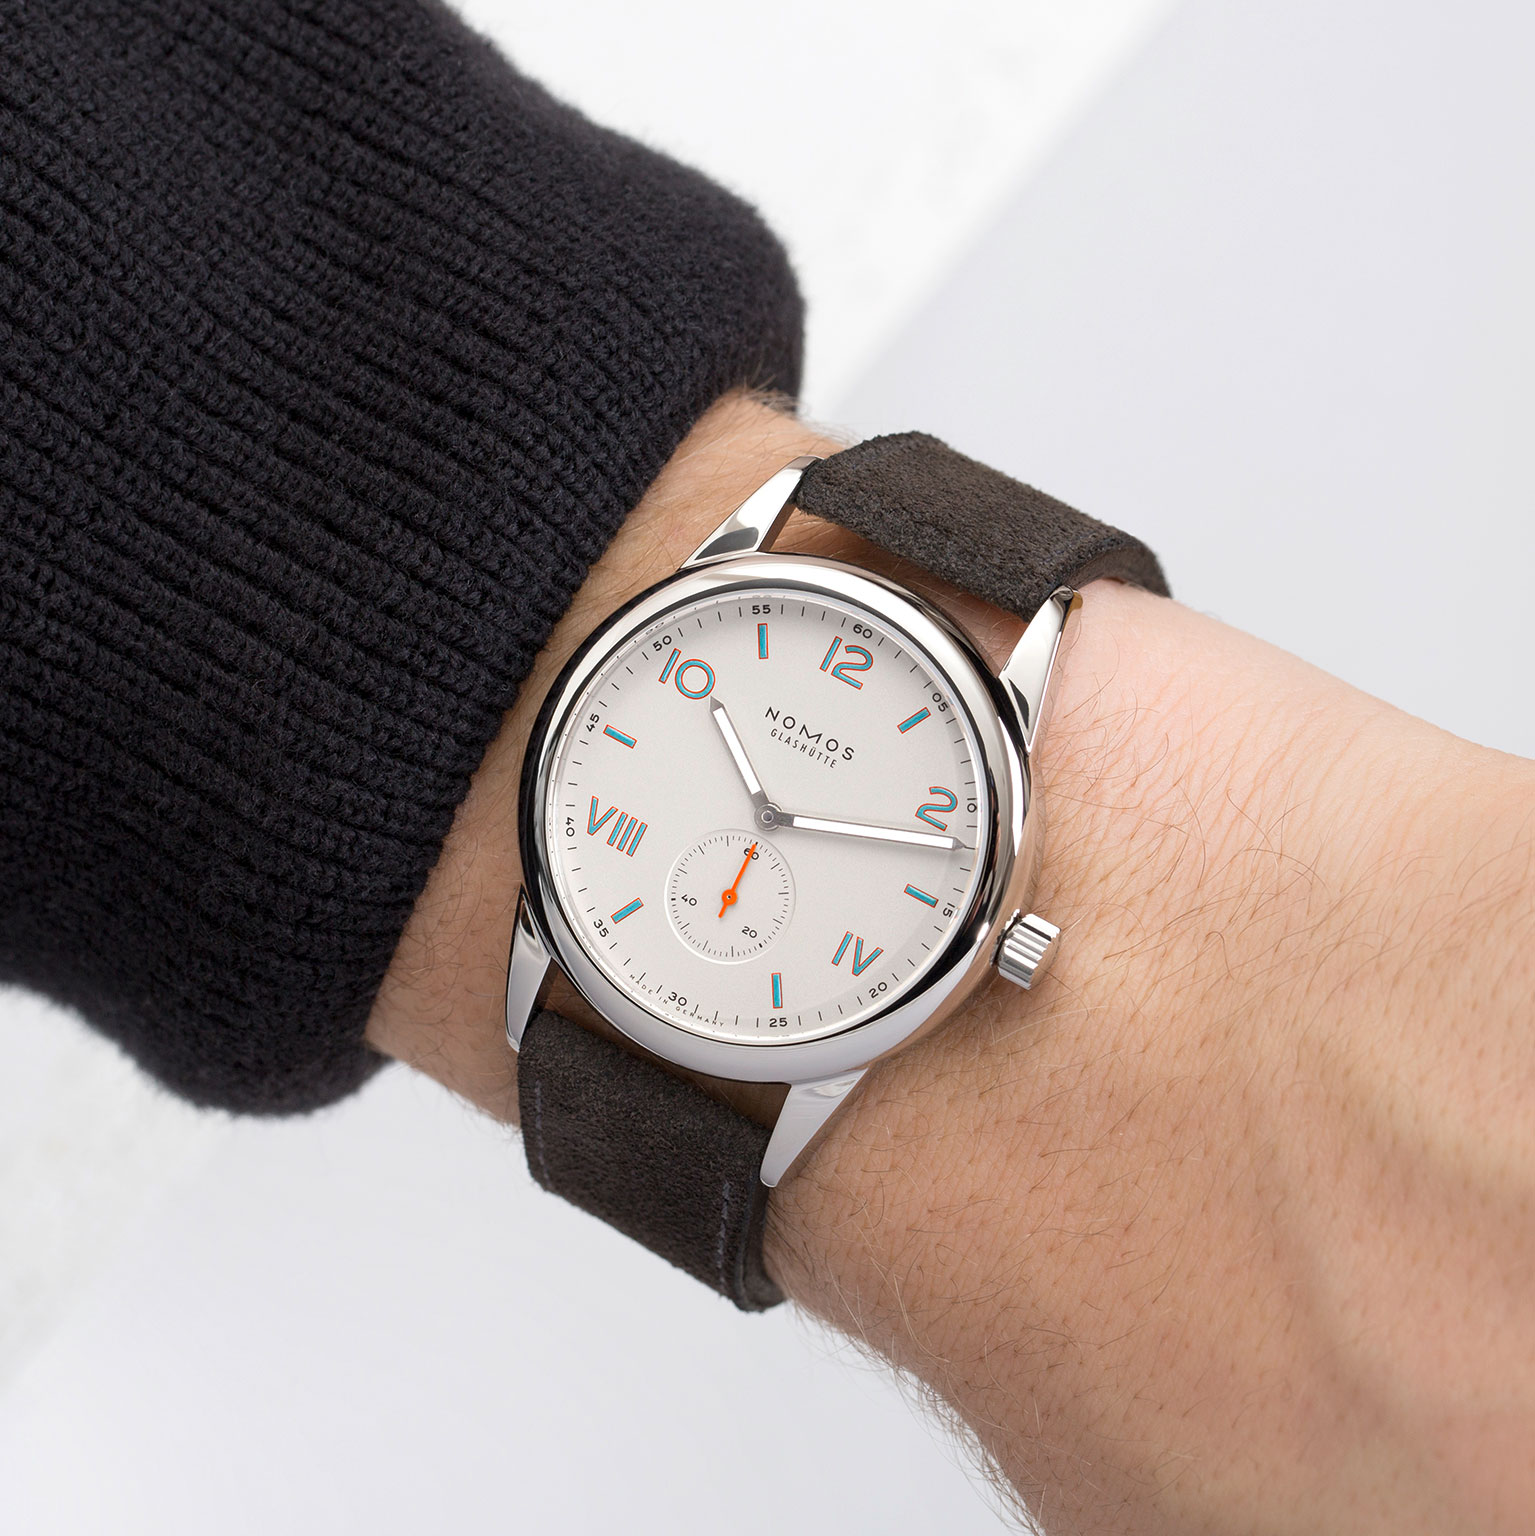 Nomos Introduces Club Campus, the Affordable Graduate's Watch with a  California Dial | SJX Watches